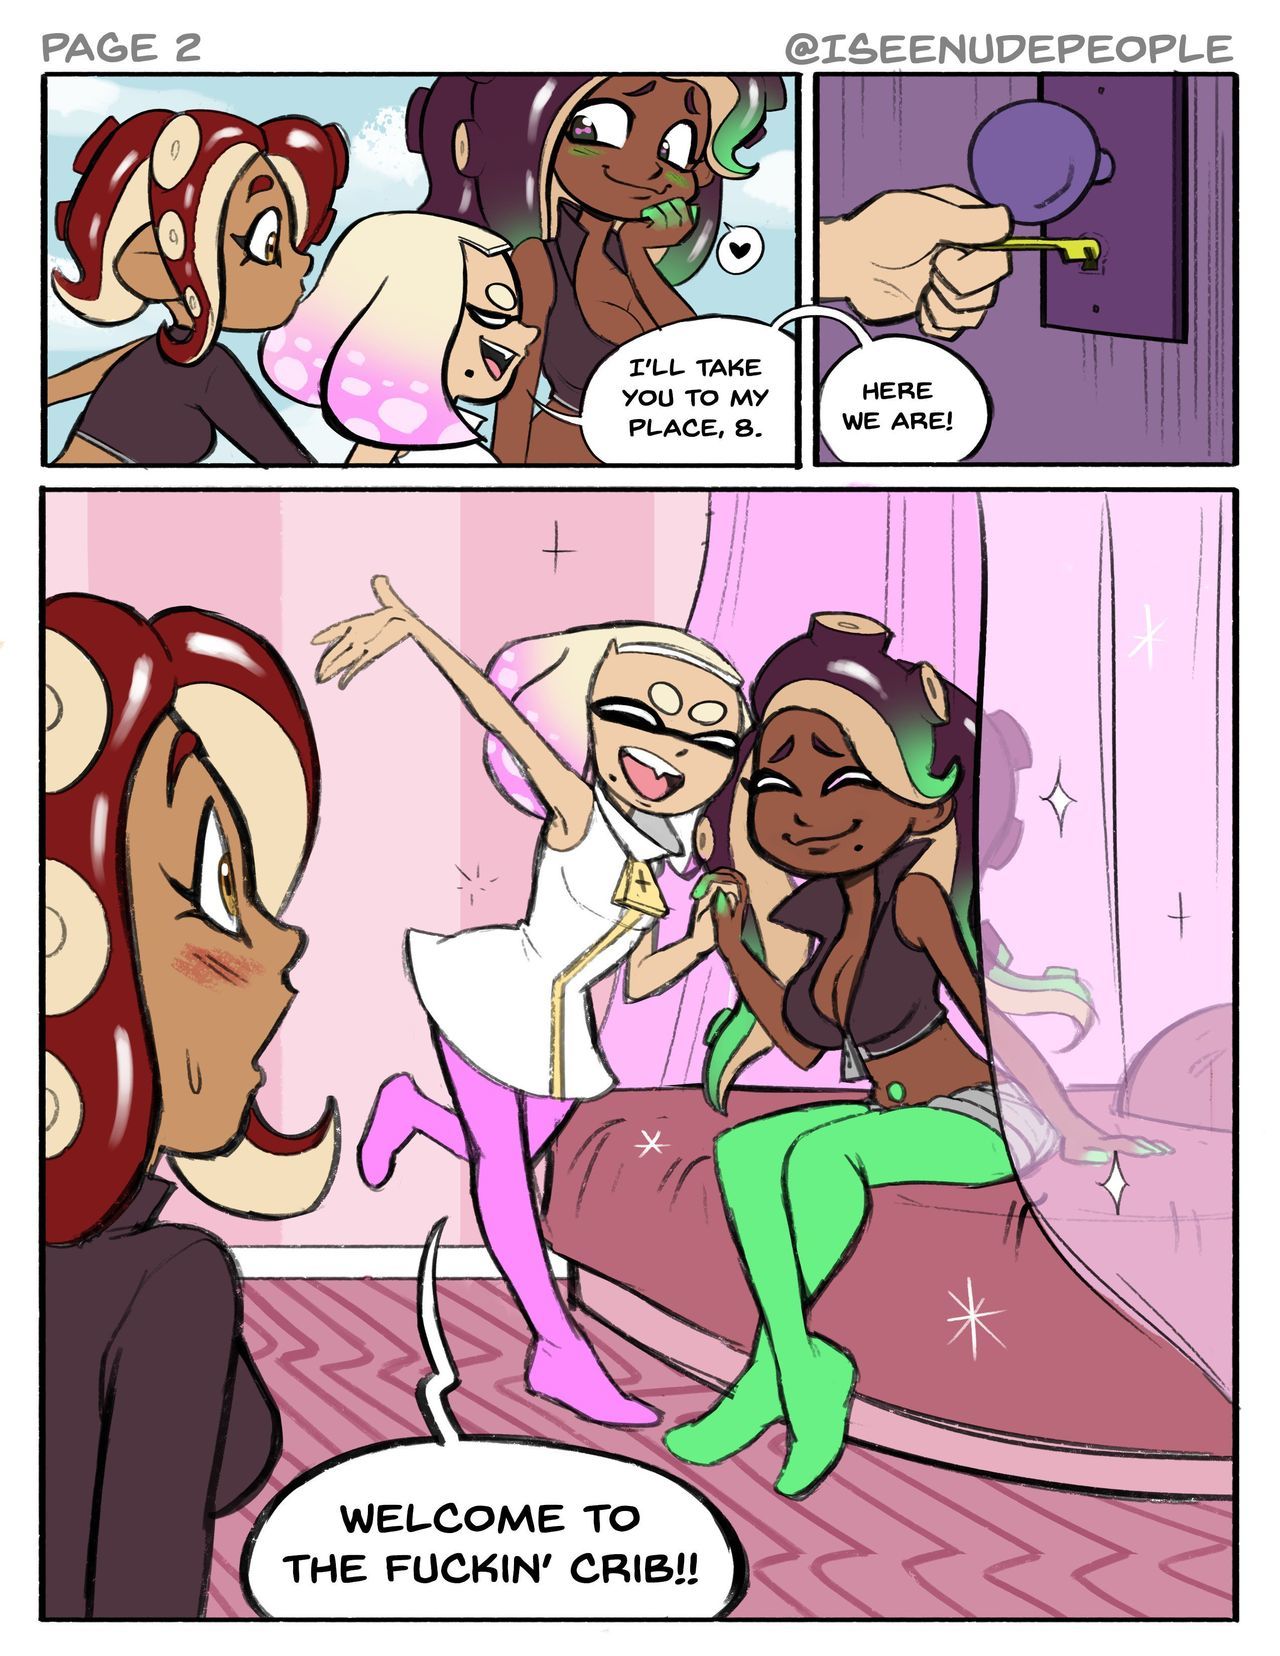 A Date with 8 - IseeNudePeople [Splatoon] page 2